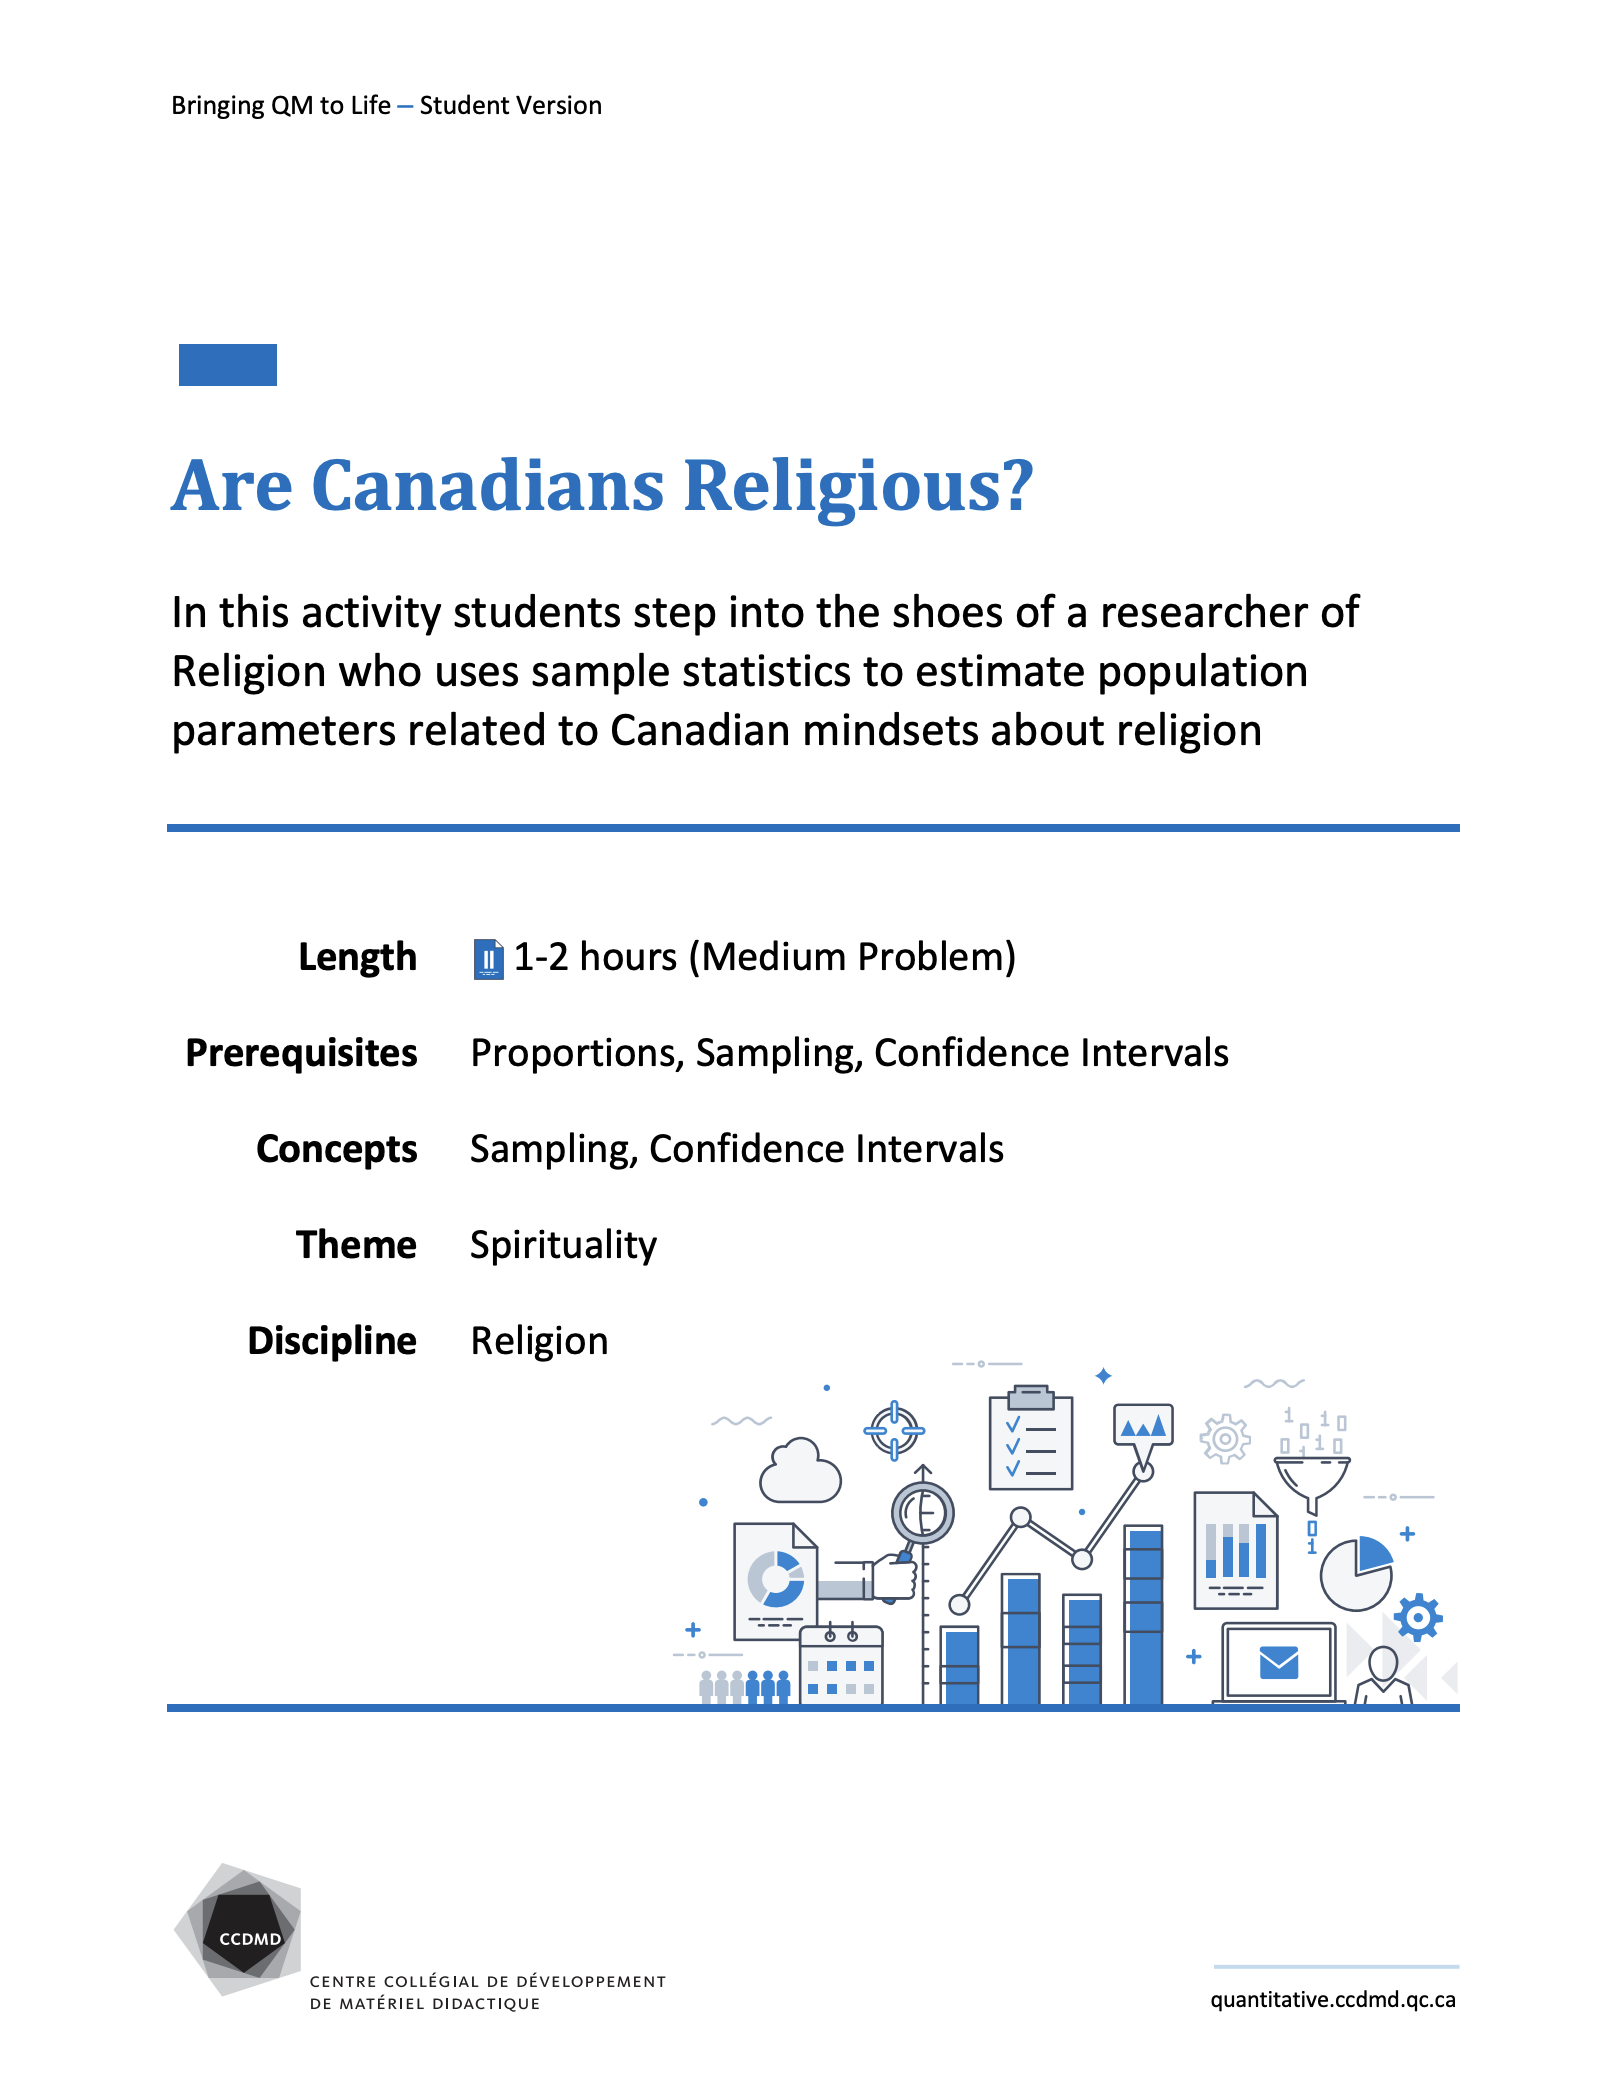 Are Canadians Religious?